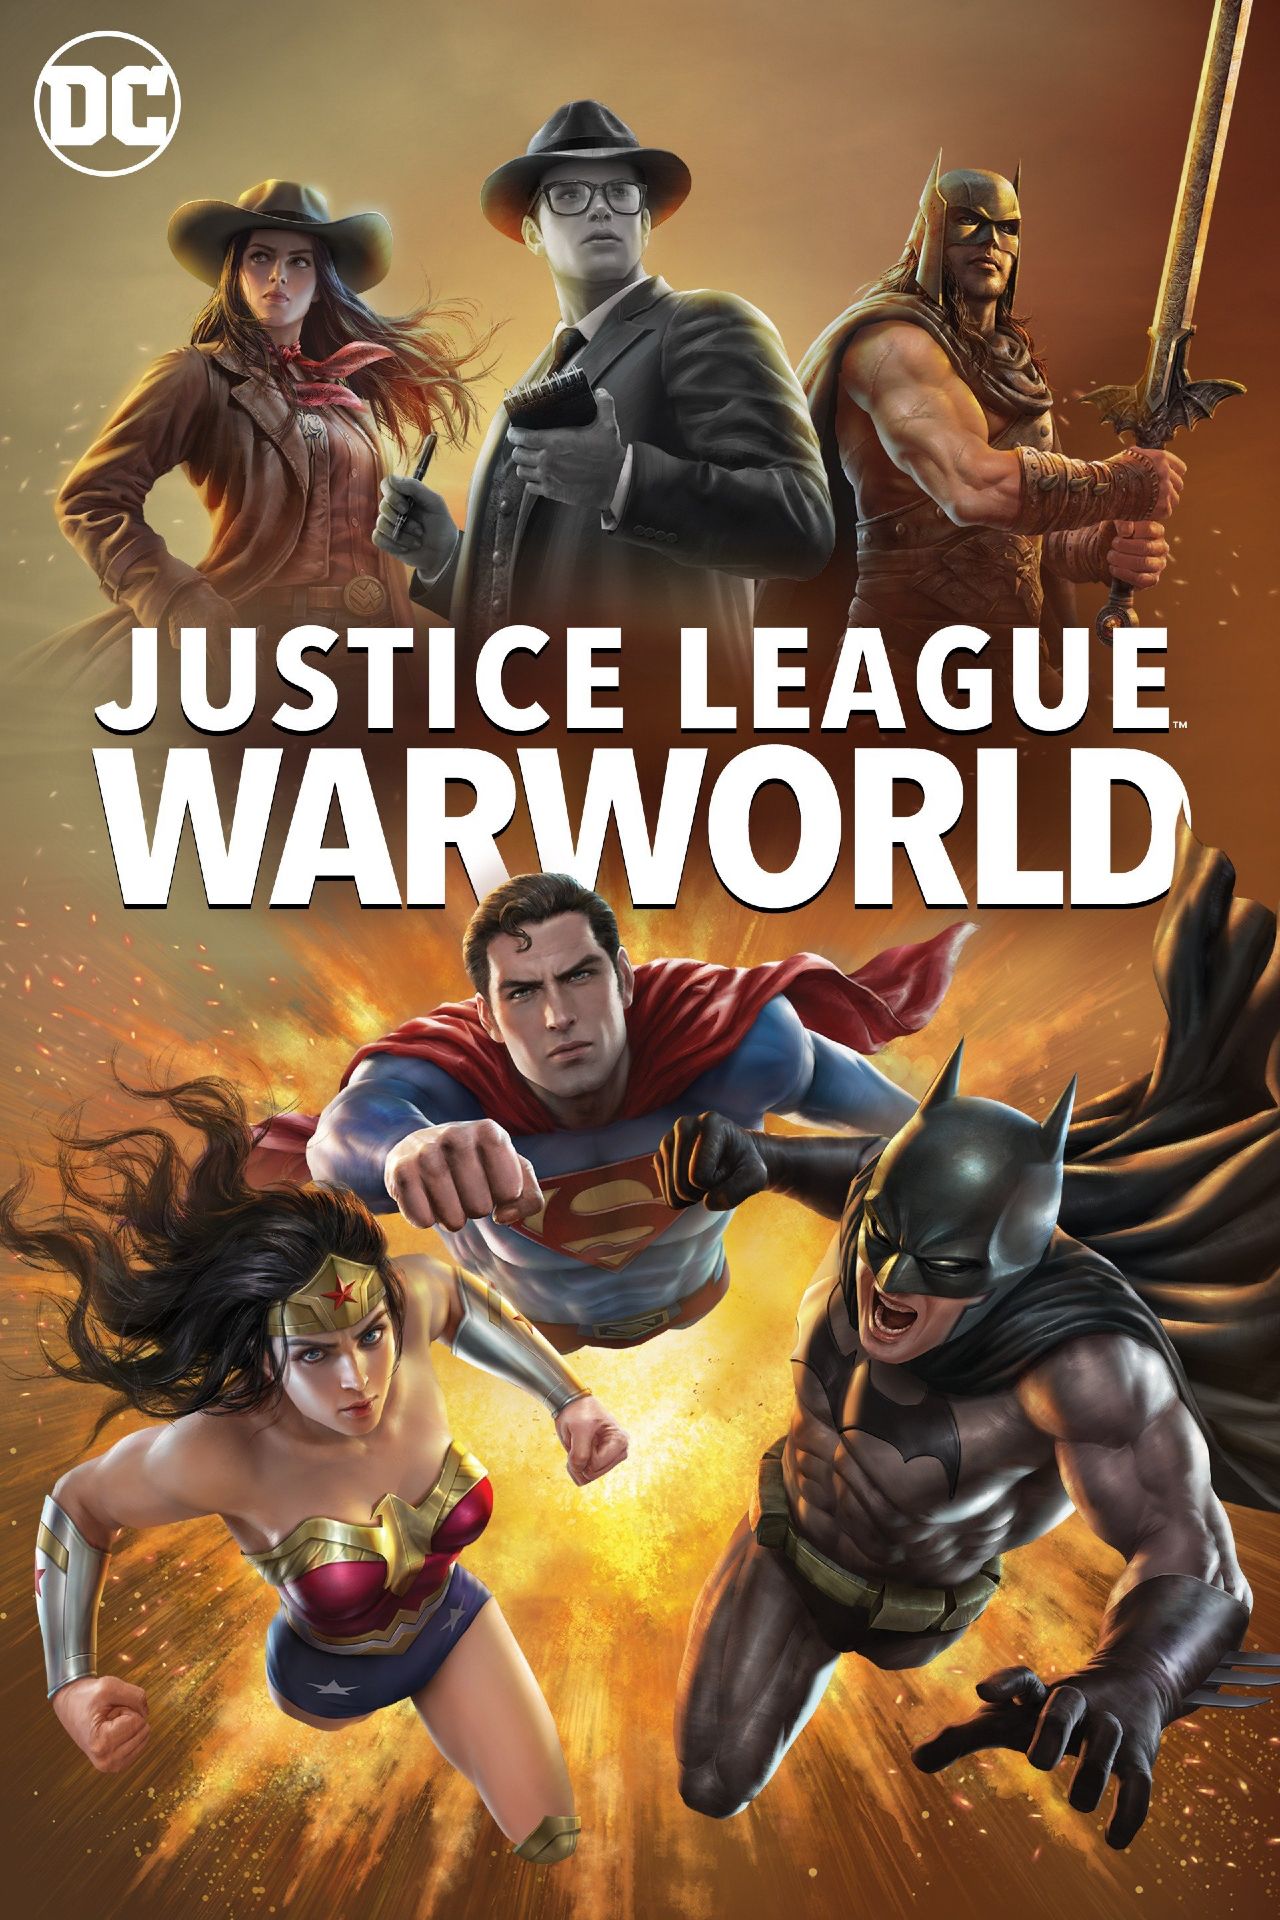 Justice League Warworld Movie Poster